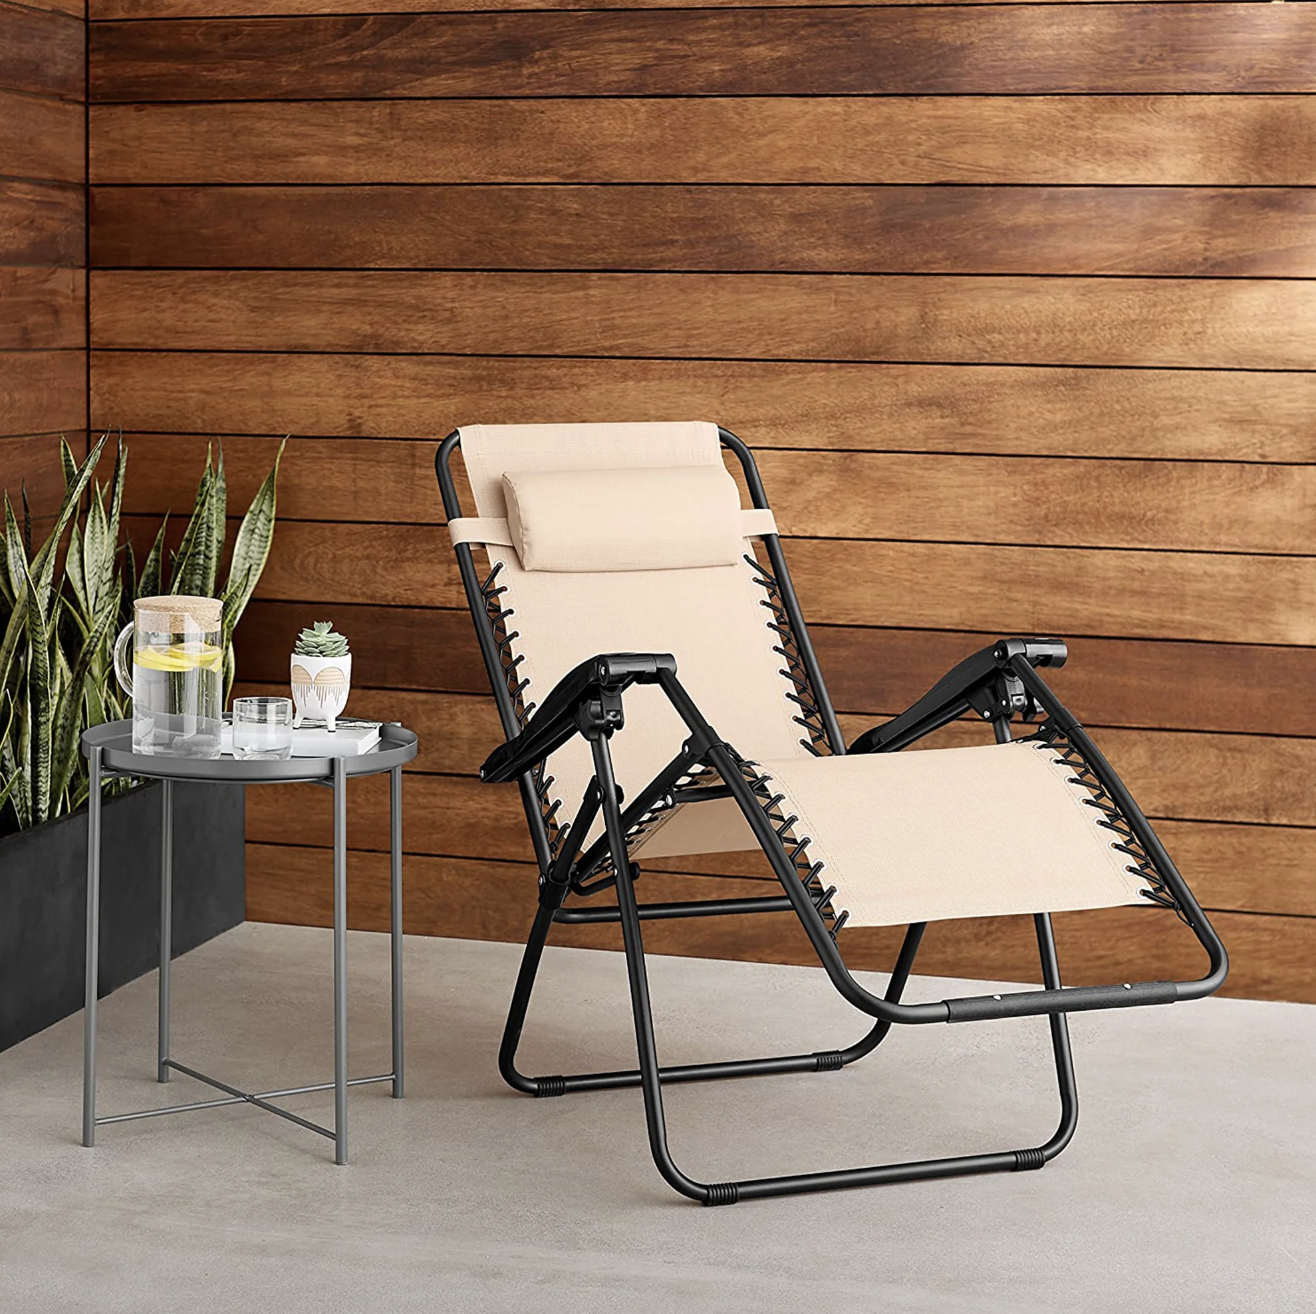 A Zero Gravity Chair Is What Your Outdoor Space Is Missing